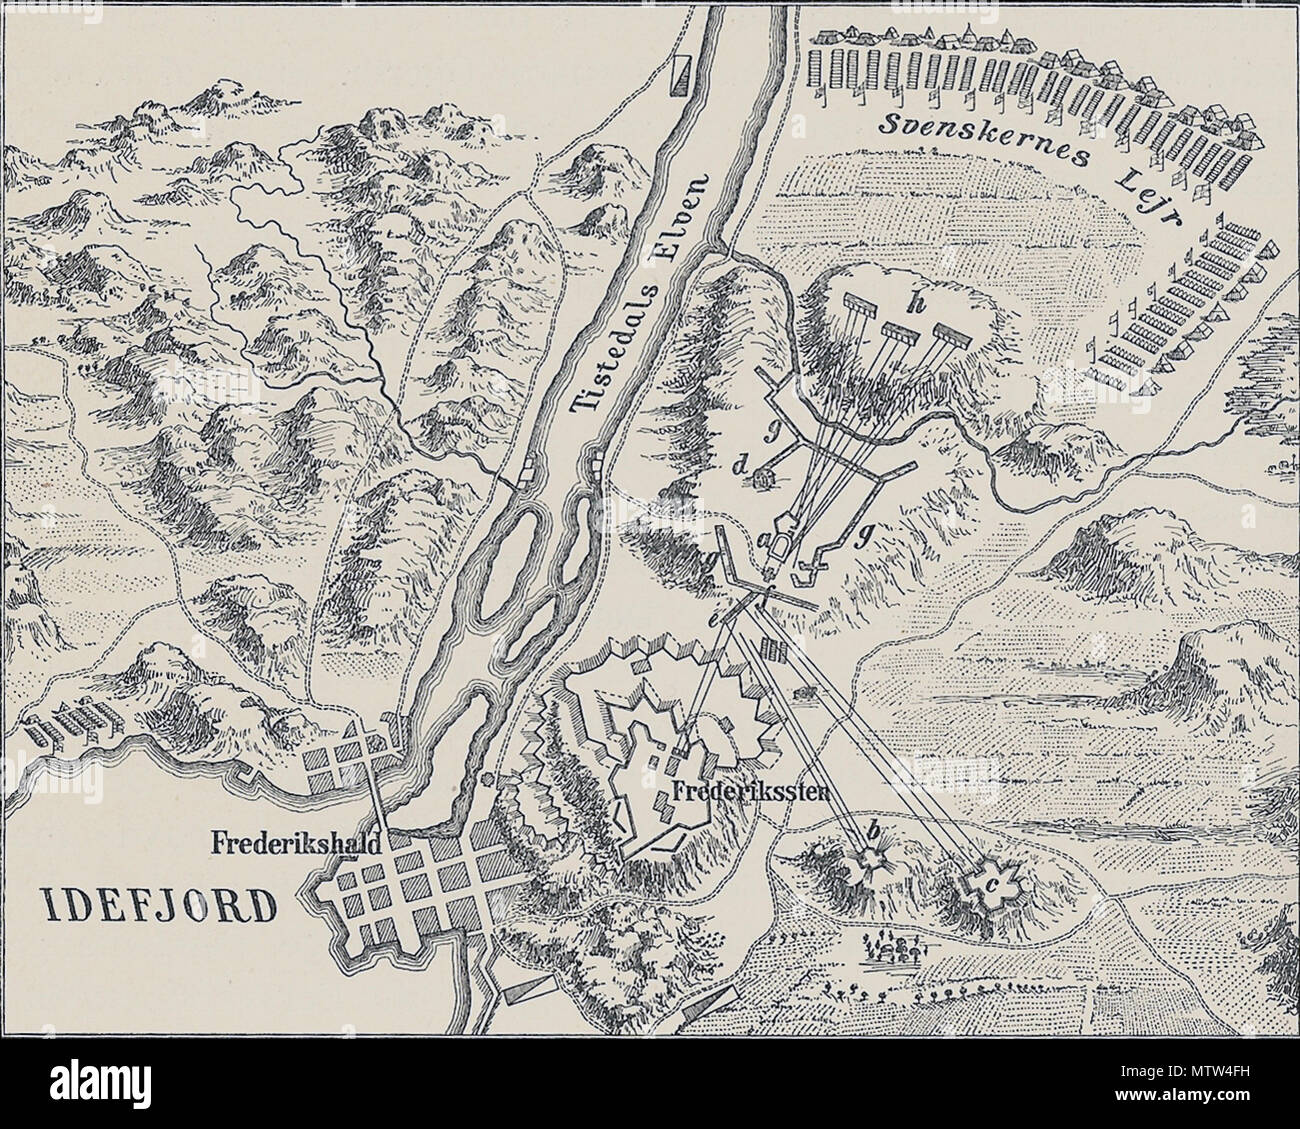 . English: Plan of the Siege of Frederiksten 1718. Key to the letters: a) The Fort Gyldenløve b) The Great Tower c) Overbjerget d) The hut of Karl XII e) The place where Karl XII was shot f & g) Swedish trenches h) Swedish artillery positions . 1907. Saddhiyama 487 Plan of the Siege of Frederiksten 1718 Stock Photo